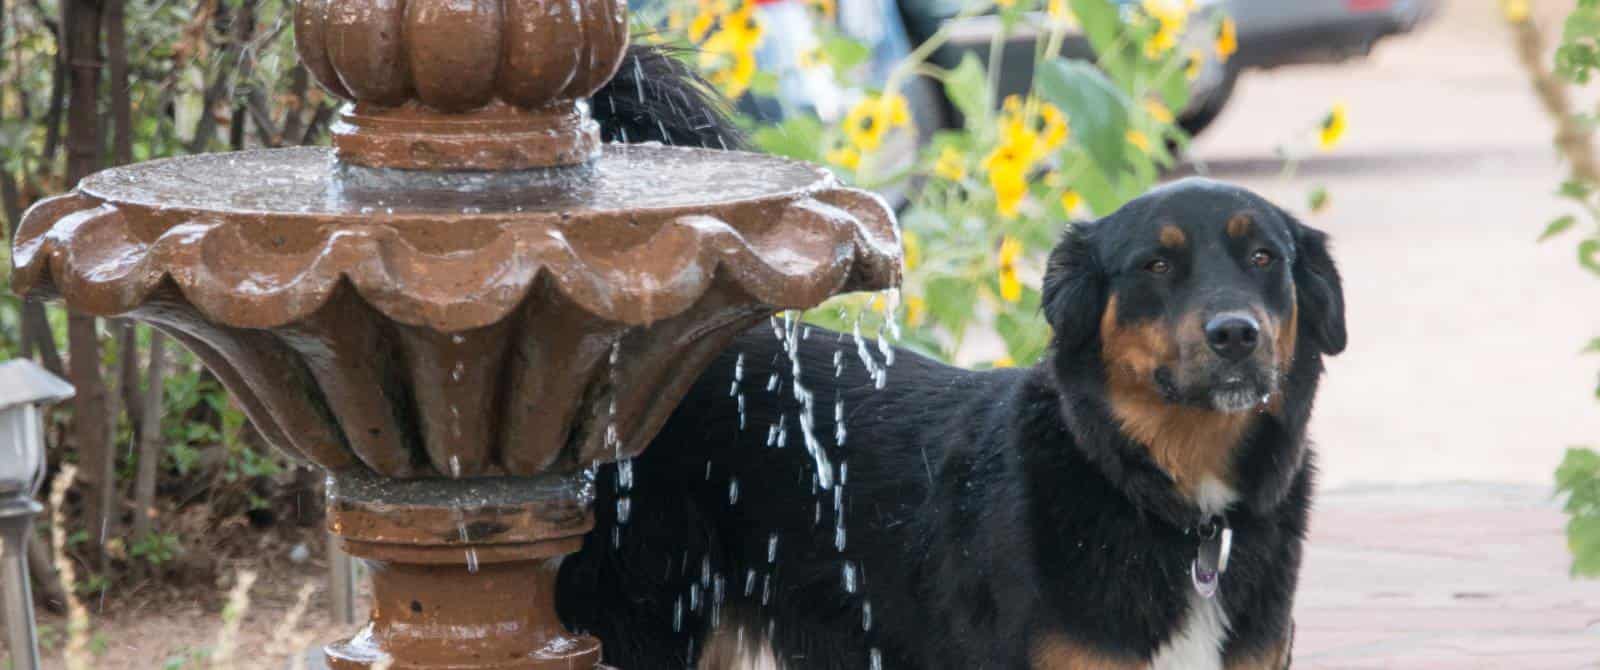 Large handsome black and tan dog stands next to stone fountain in the garden.